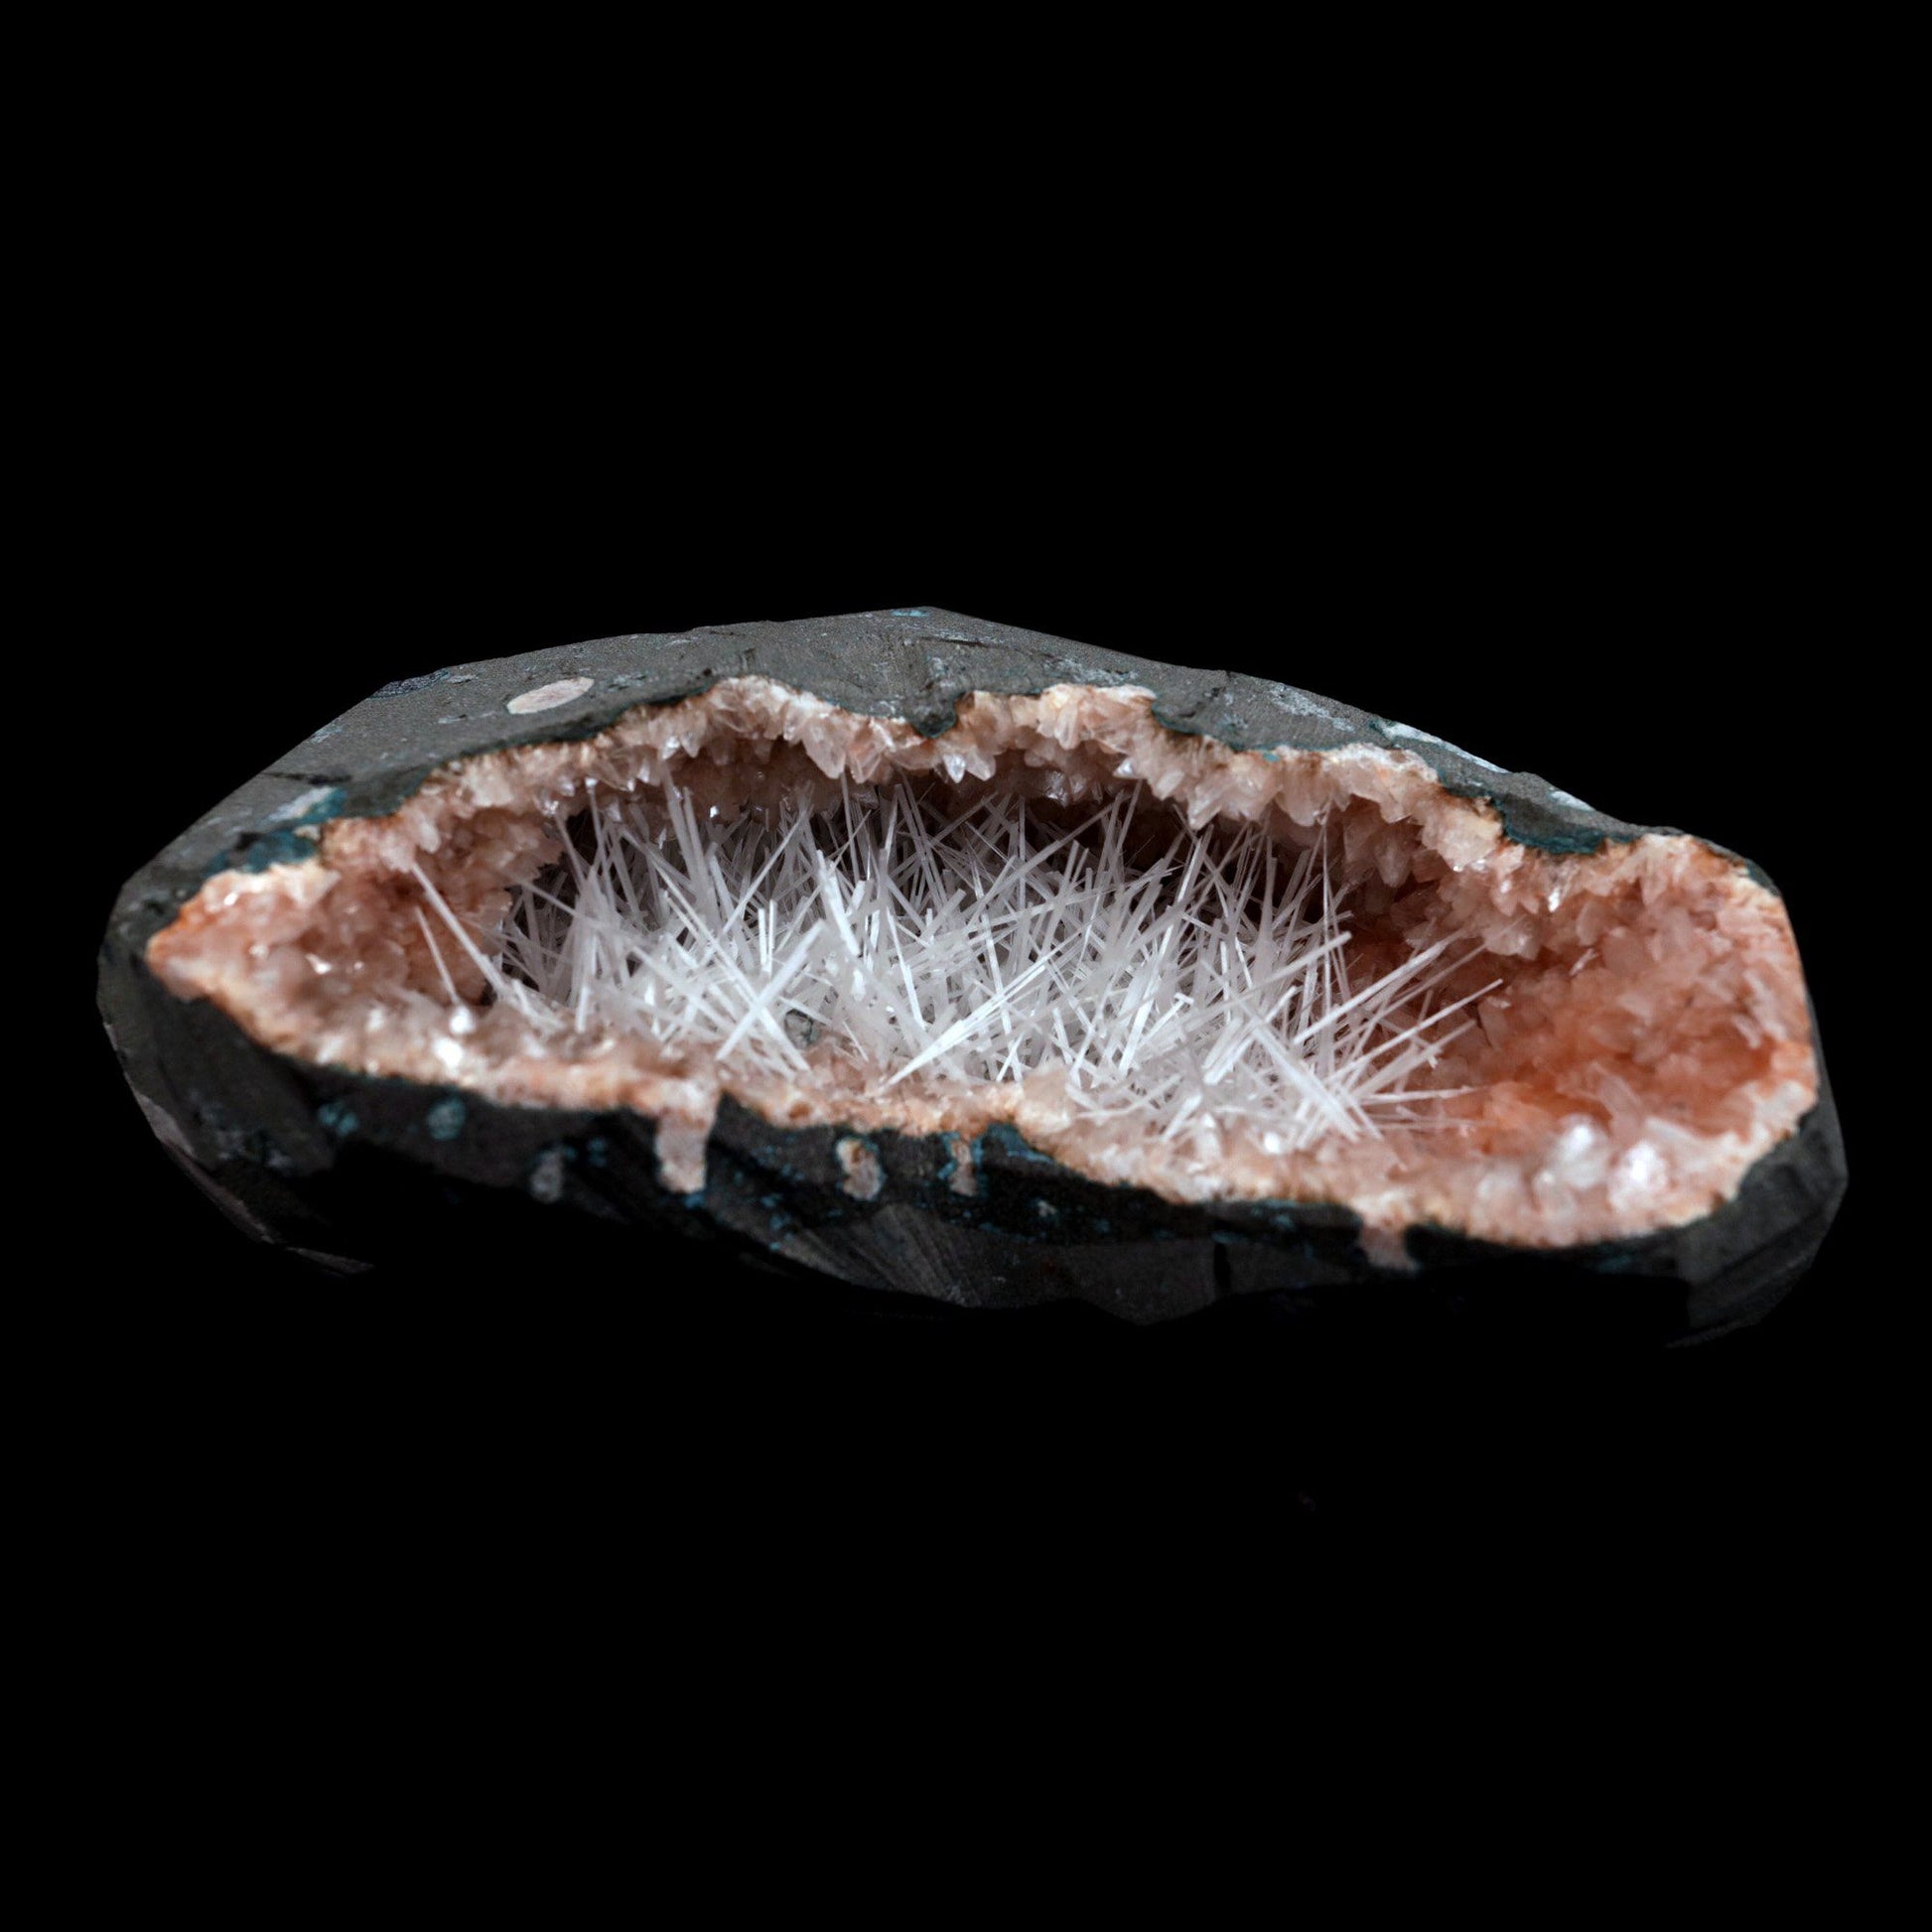 Scolecite Accular Sprays Inside Heulandite Geode Natural Mineral Speci…  https://www.superbminerals.us/products/scolecite-accular-sprays-inside-heulandite-geode-natural-mineral-specimen-b-4901  Features: Decorative geode encircled with beige, glossy Heulandite crystals, this piece has a pleasing aesthetic appearance. The crystals have a well-defined sheen that is pearly, almost glassy in appearance. This item has a lot of glimmer to it. The condition is excellent. Primary Mineral(s): Scolecite